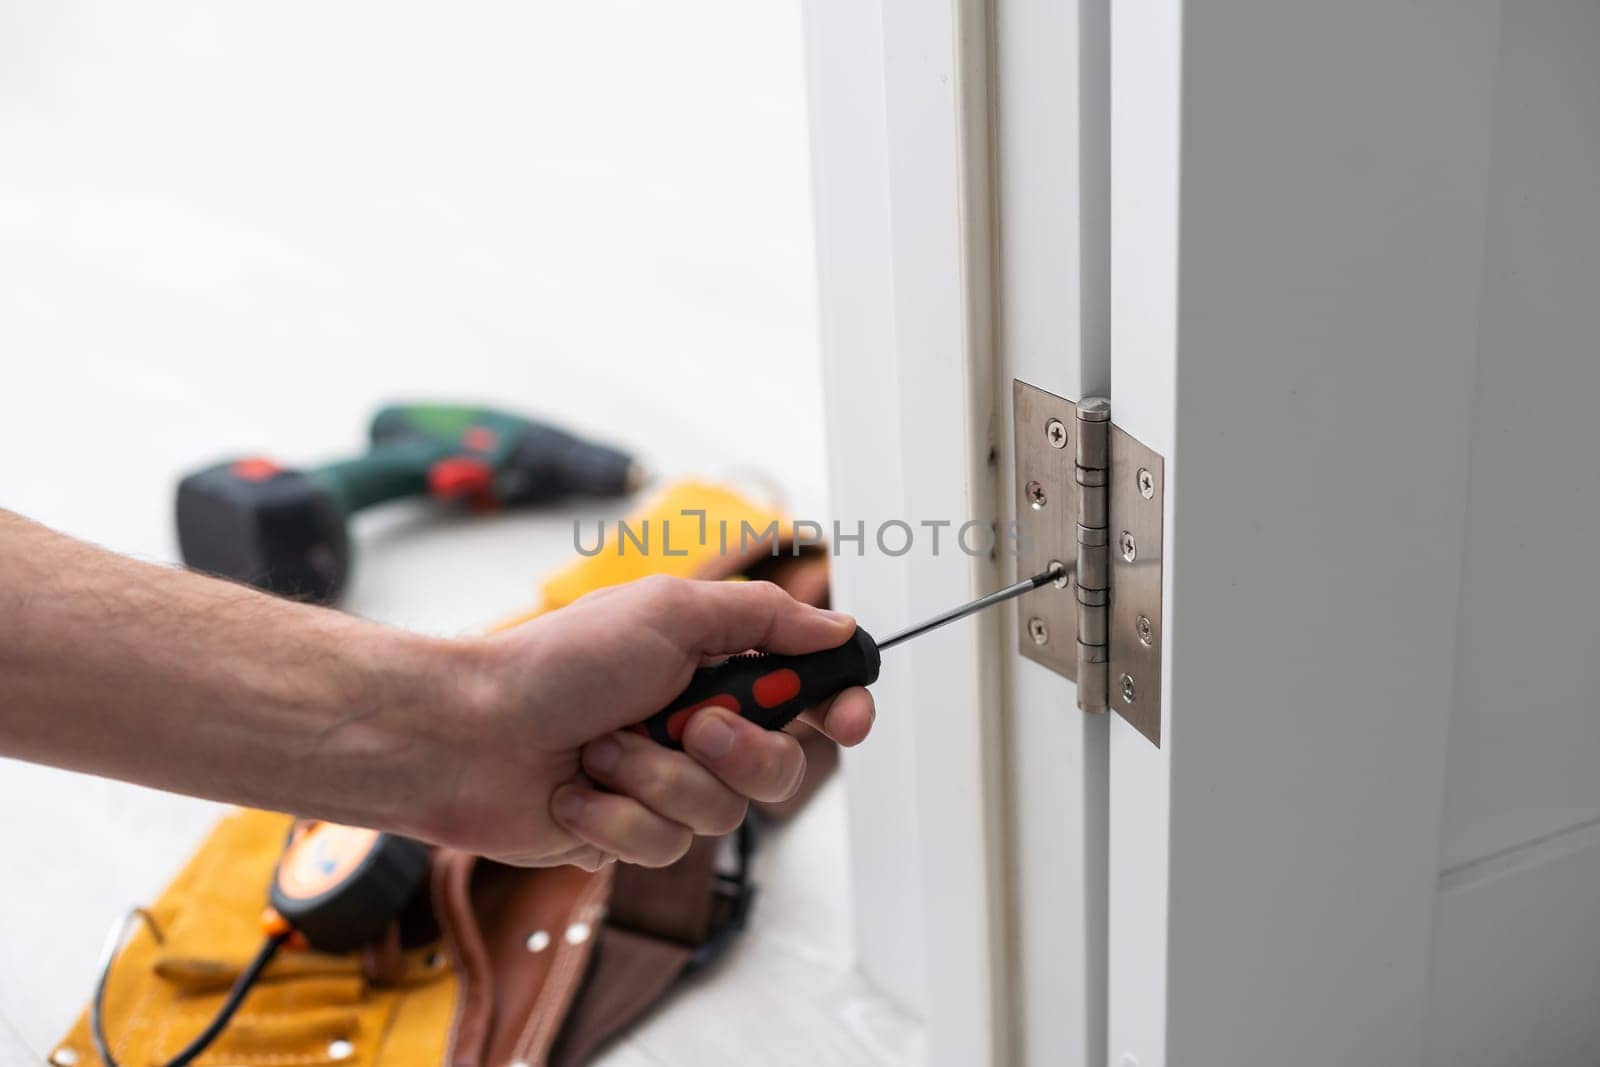 Door hinge installation. High quality photo by Andelov13